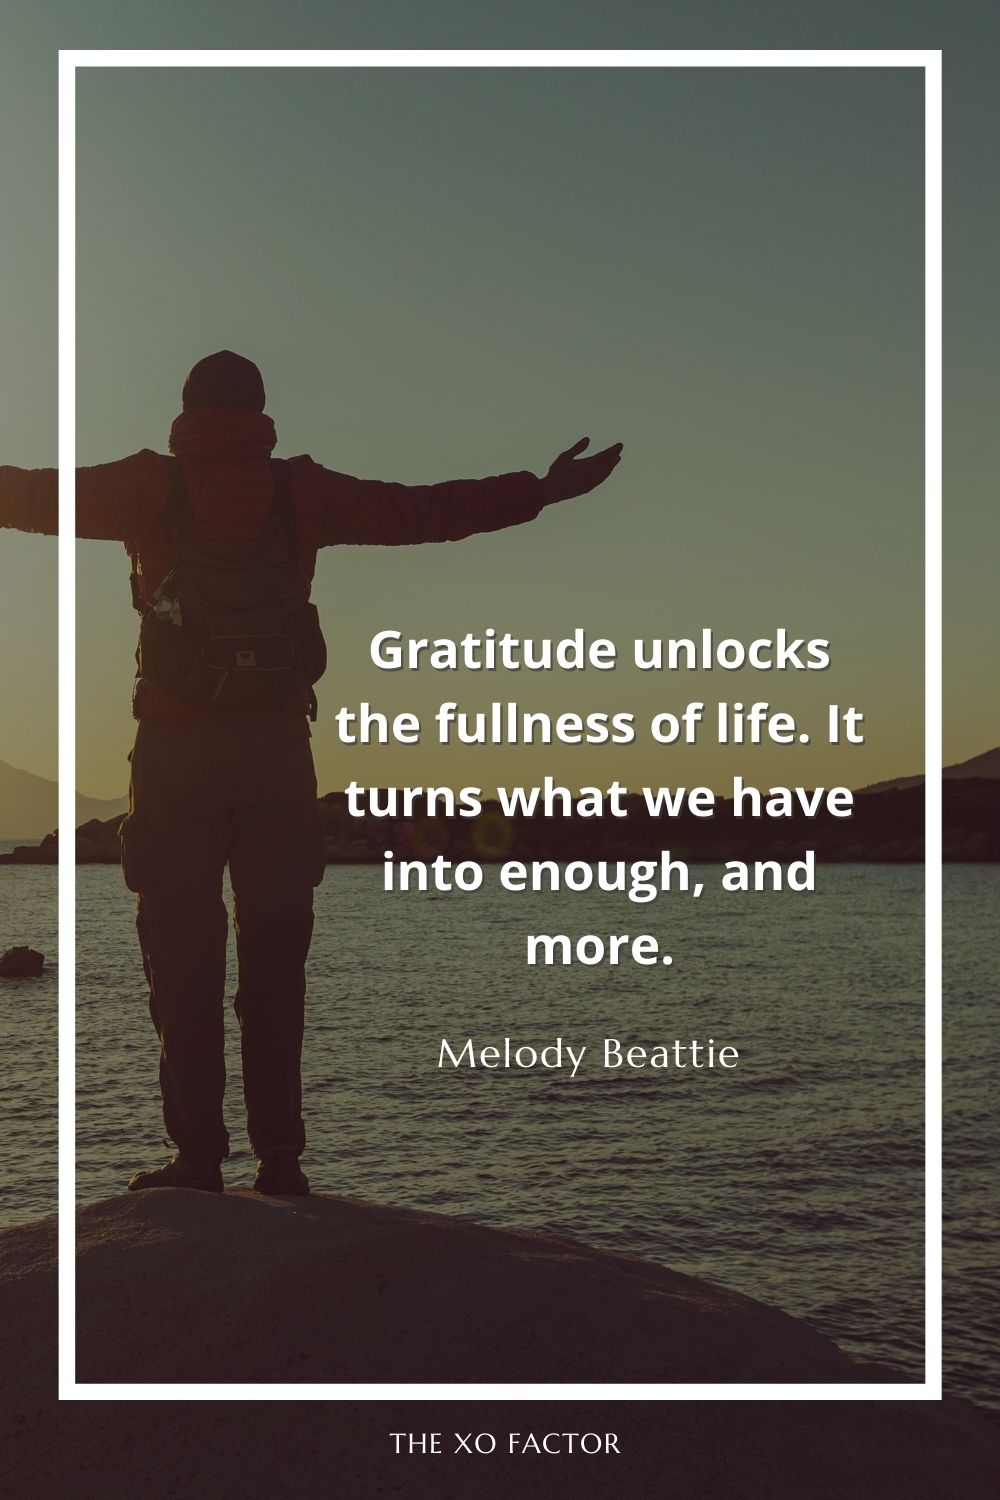 Gratitude unlocks the fullness of life. It turns what we have into enough, and more.